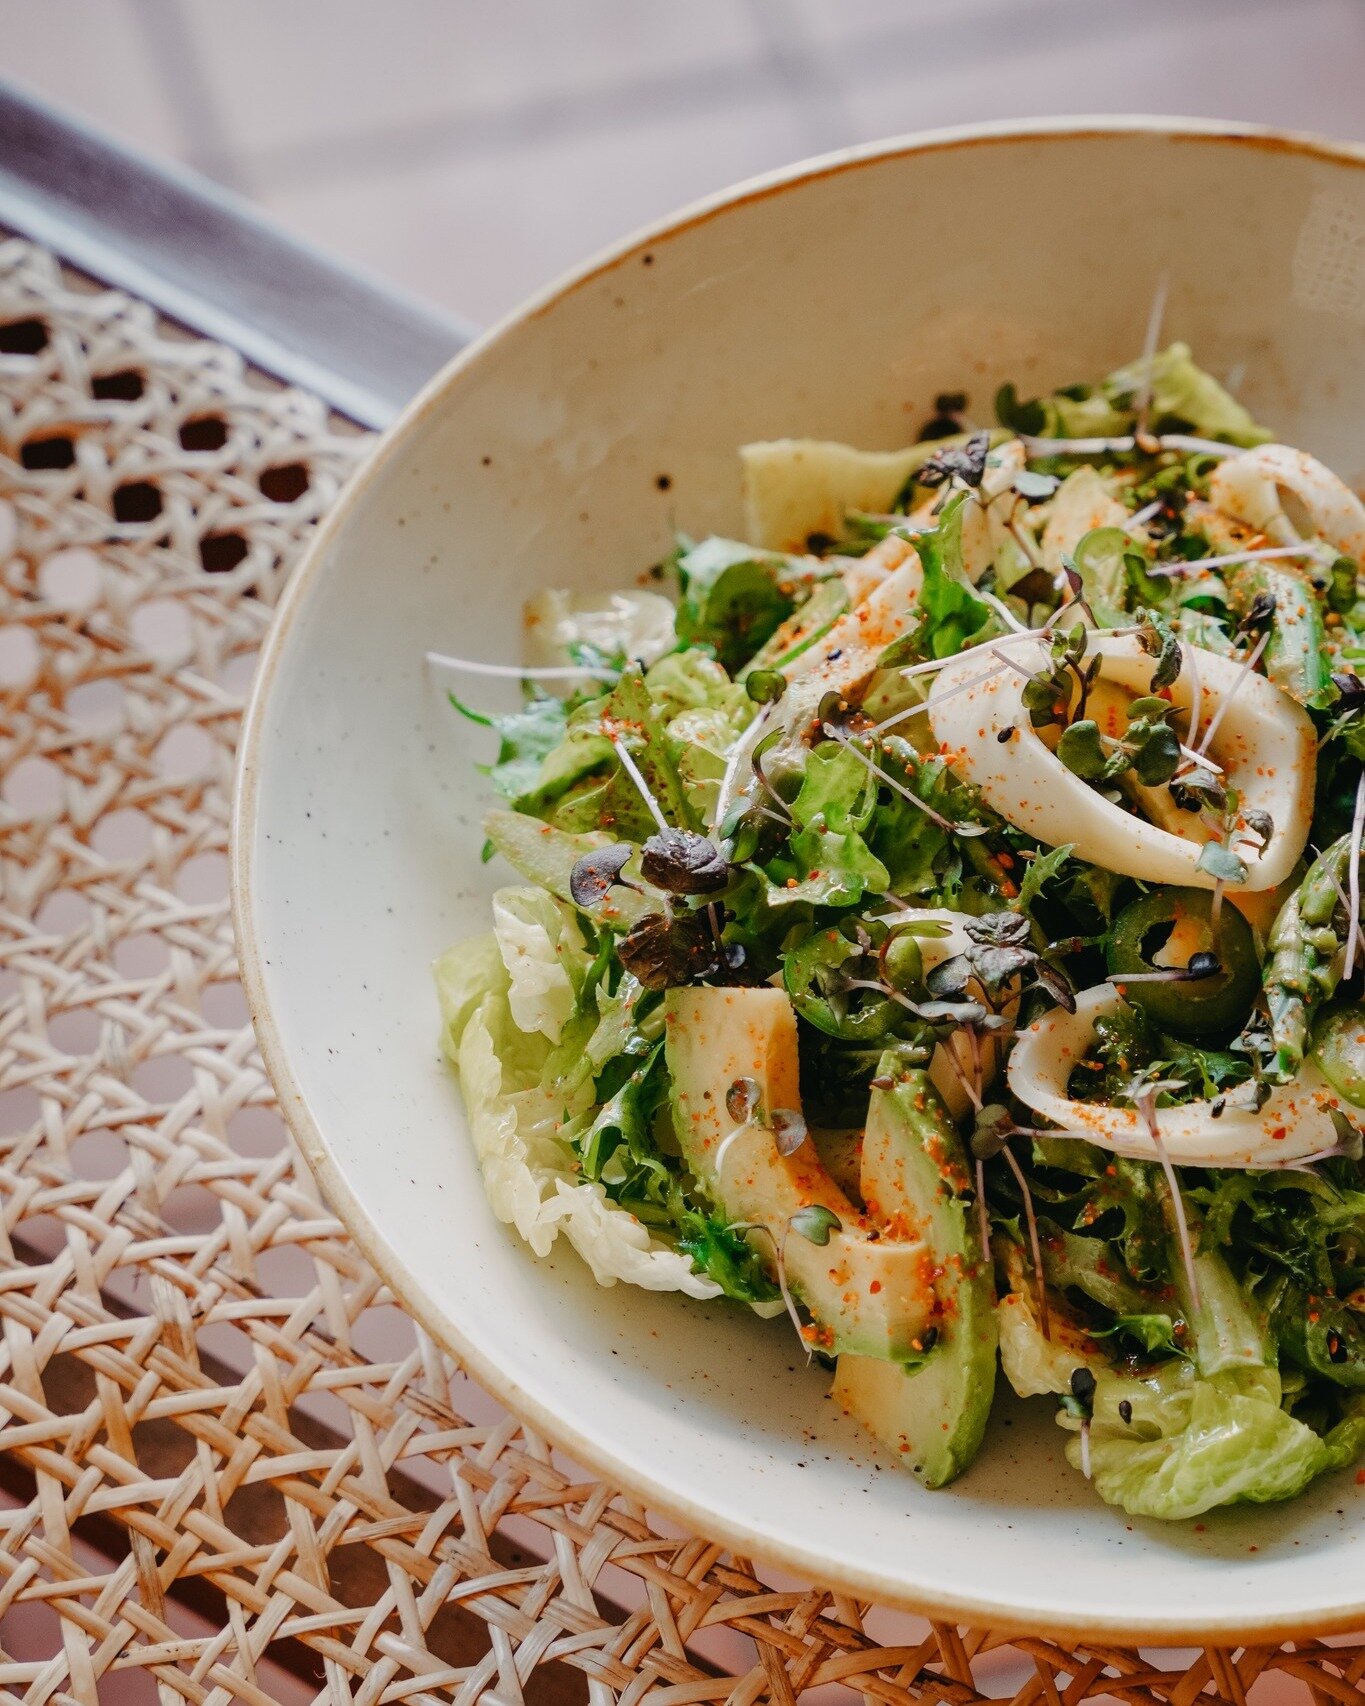 Palm Hearts, Fris&eacute;e, Chicory, and Baby Gem - California Salad done the right way. 🙌🏼